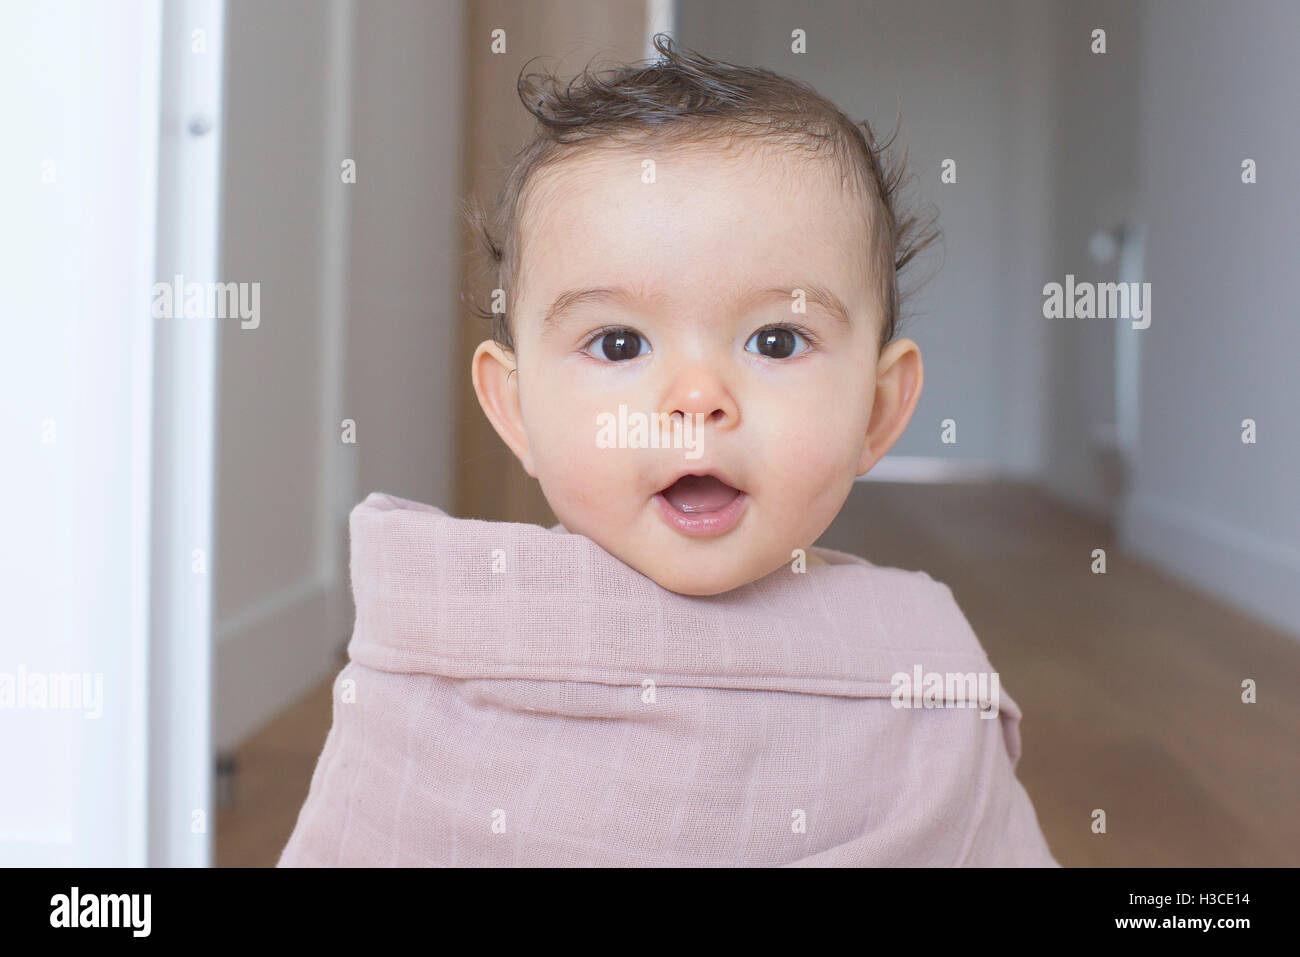 Infant wrapped in a blanket, portrait Stock Photo